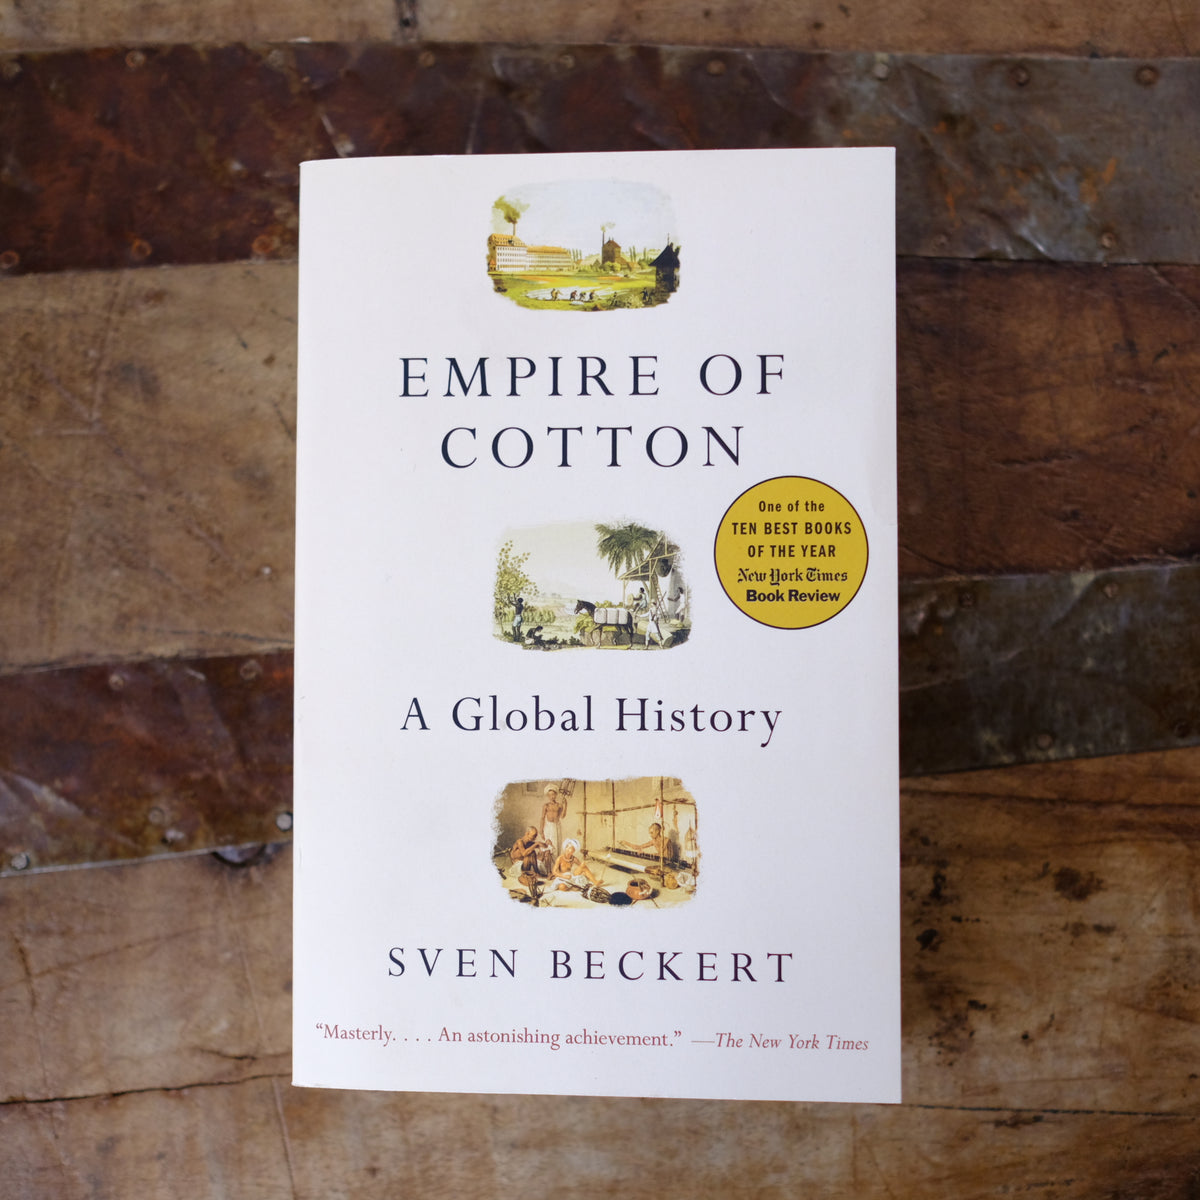 Empire of Cotton: A Global History by Sven Beckert